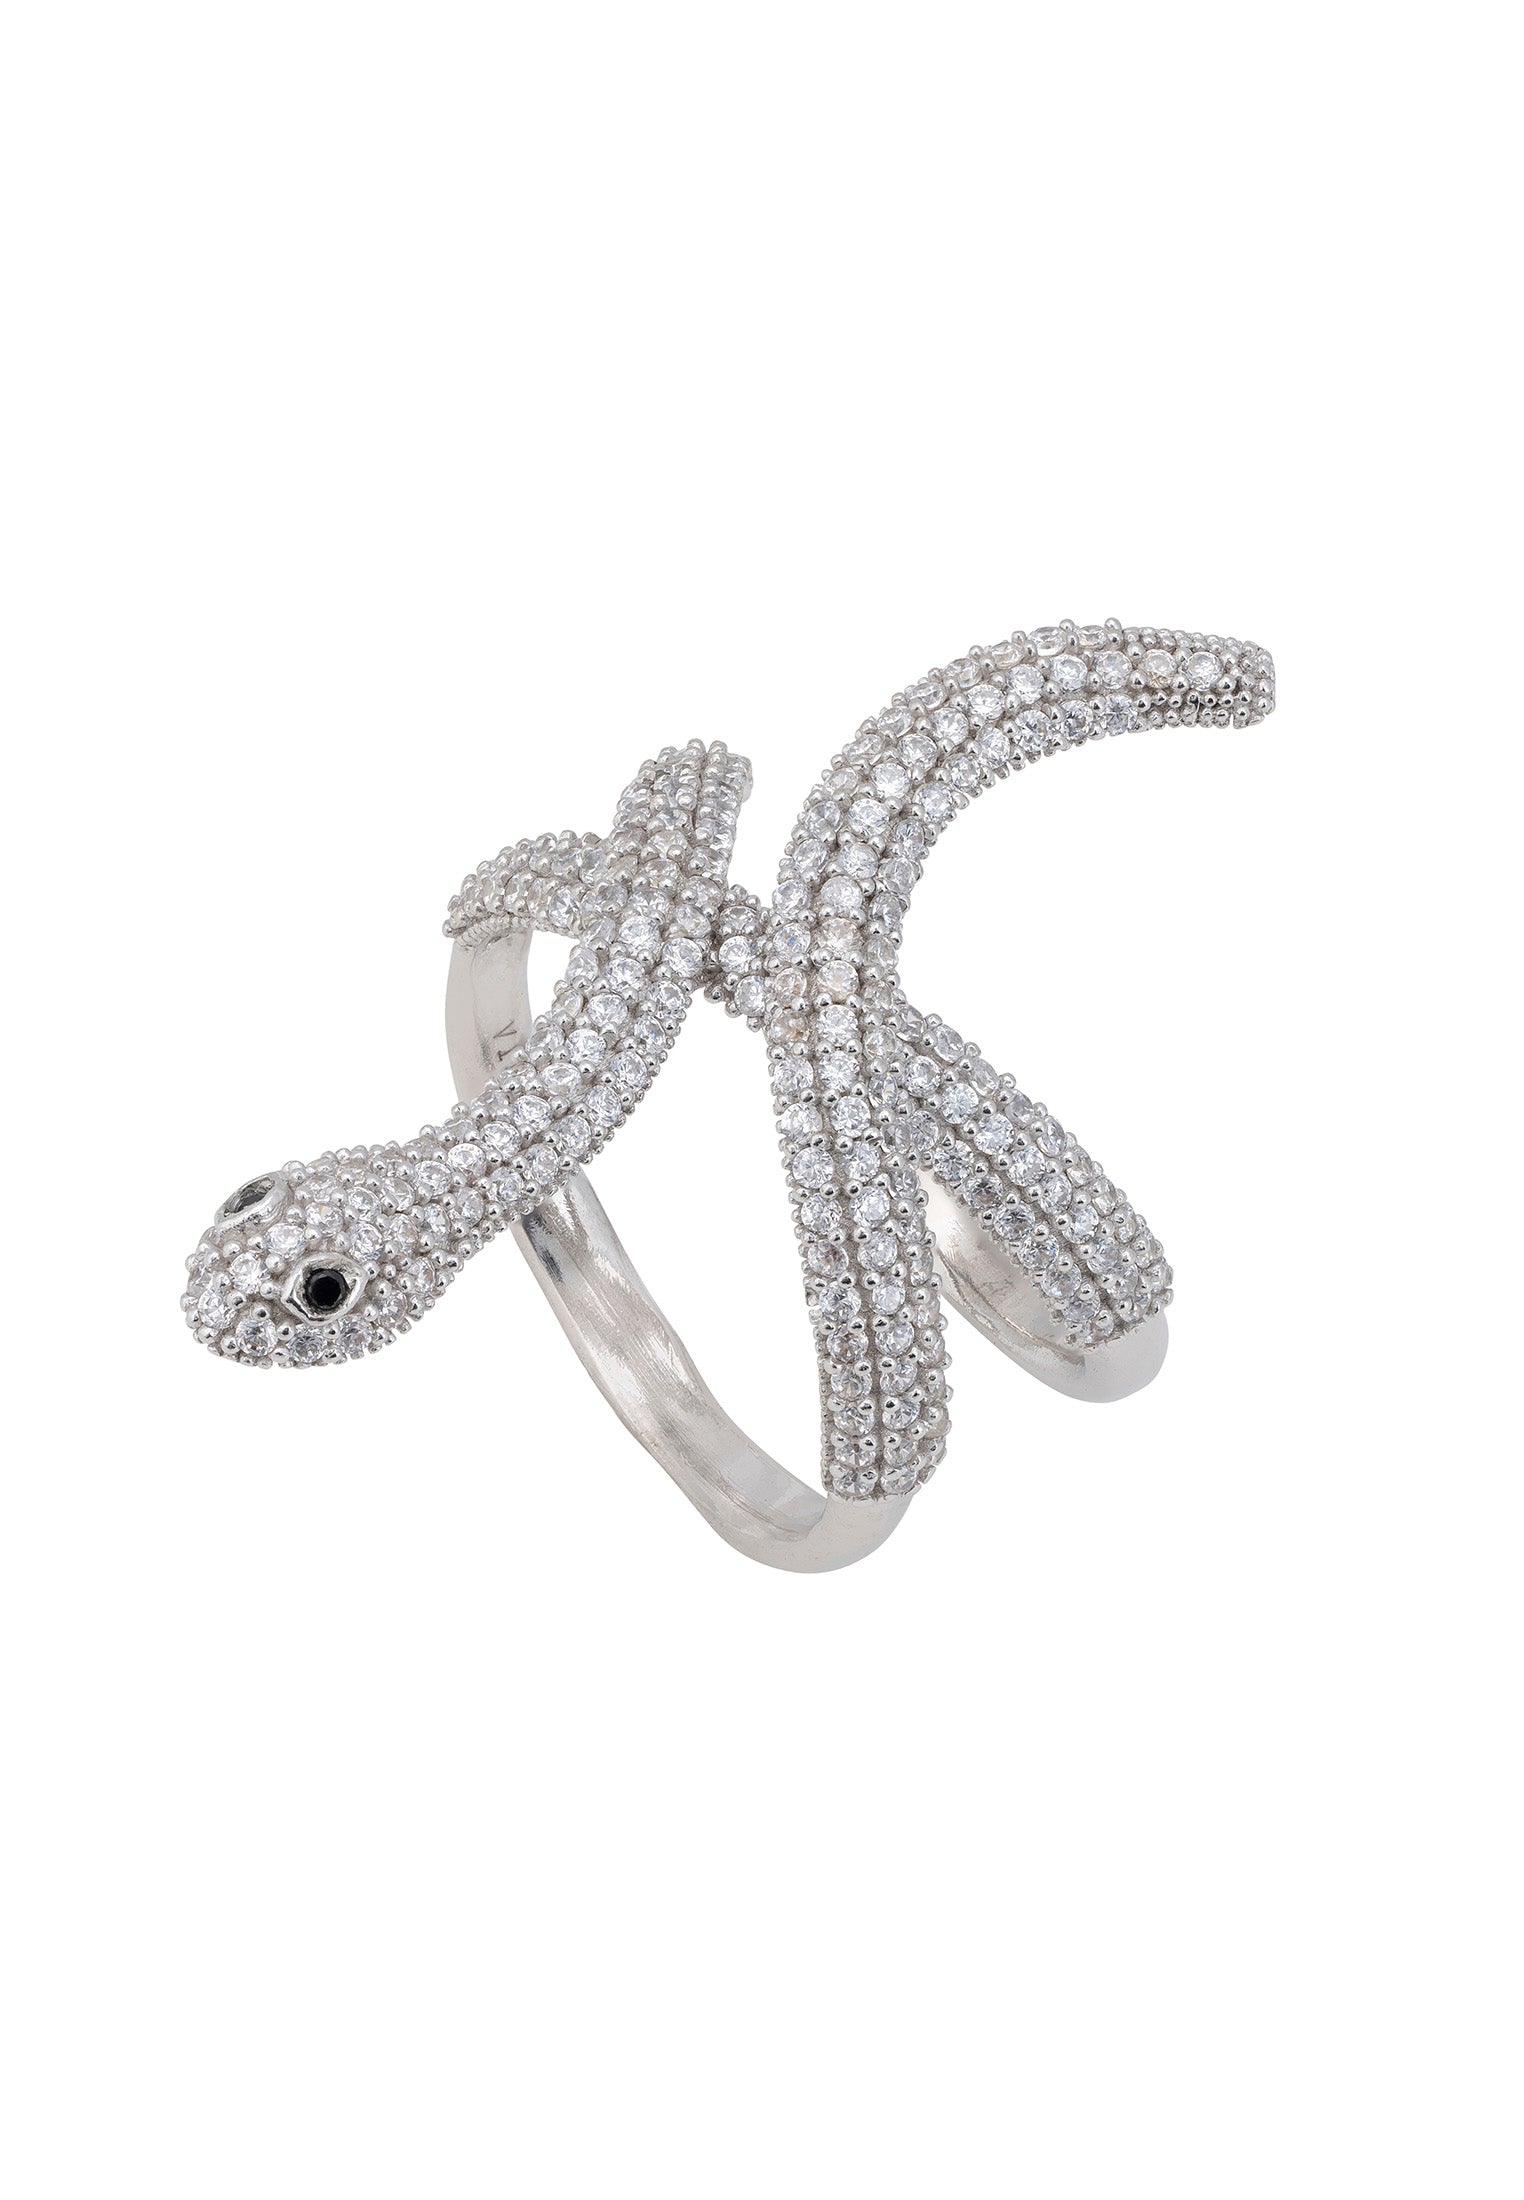 Serpentina Snake Cocktail Ring Silver White CZ